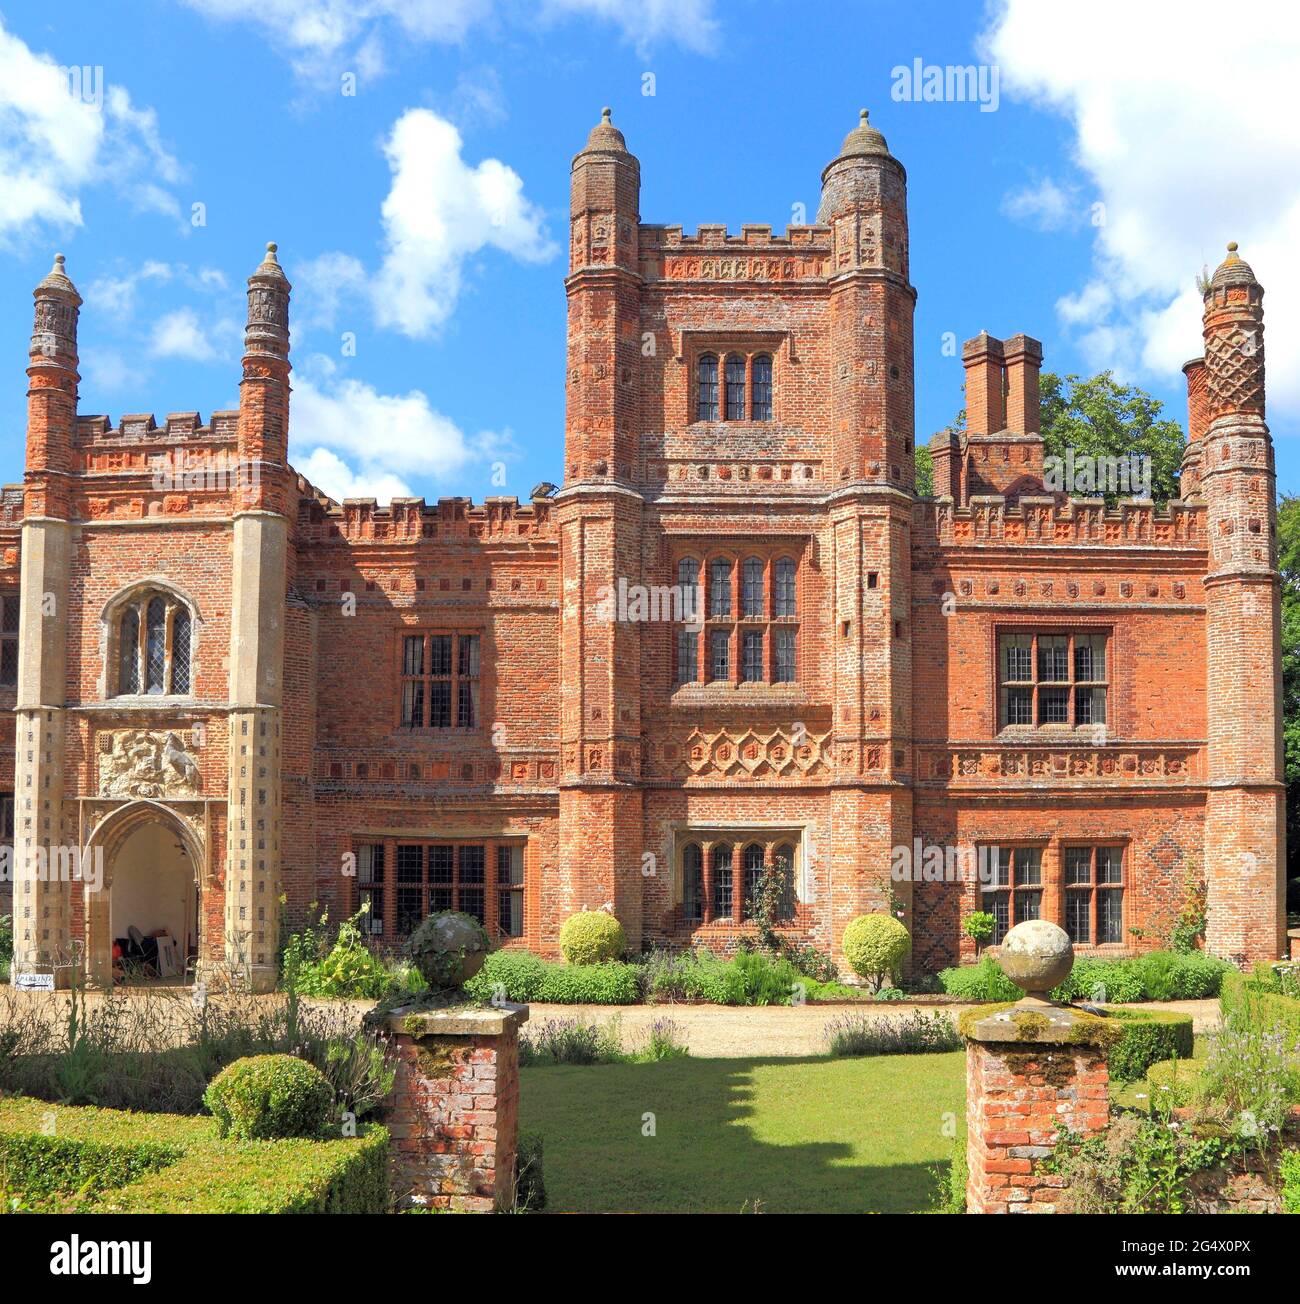 East Barsham Manor House, early 16th century, south facade, south east wing, Norfolk, England, UK 4 Stock Photo